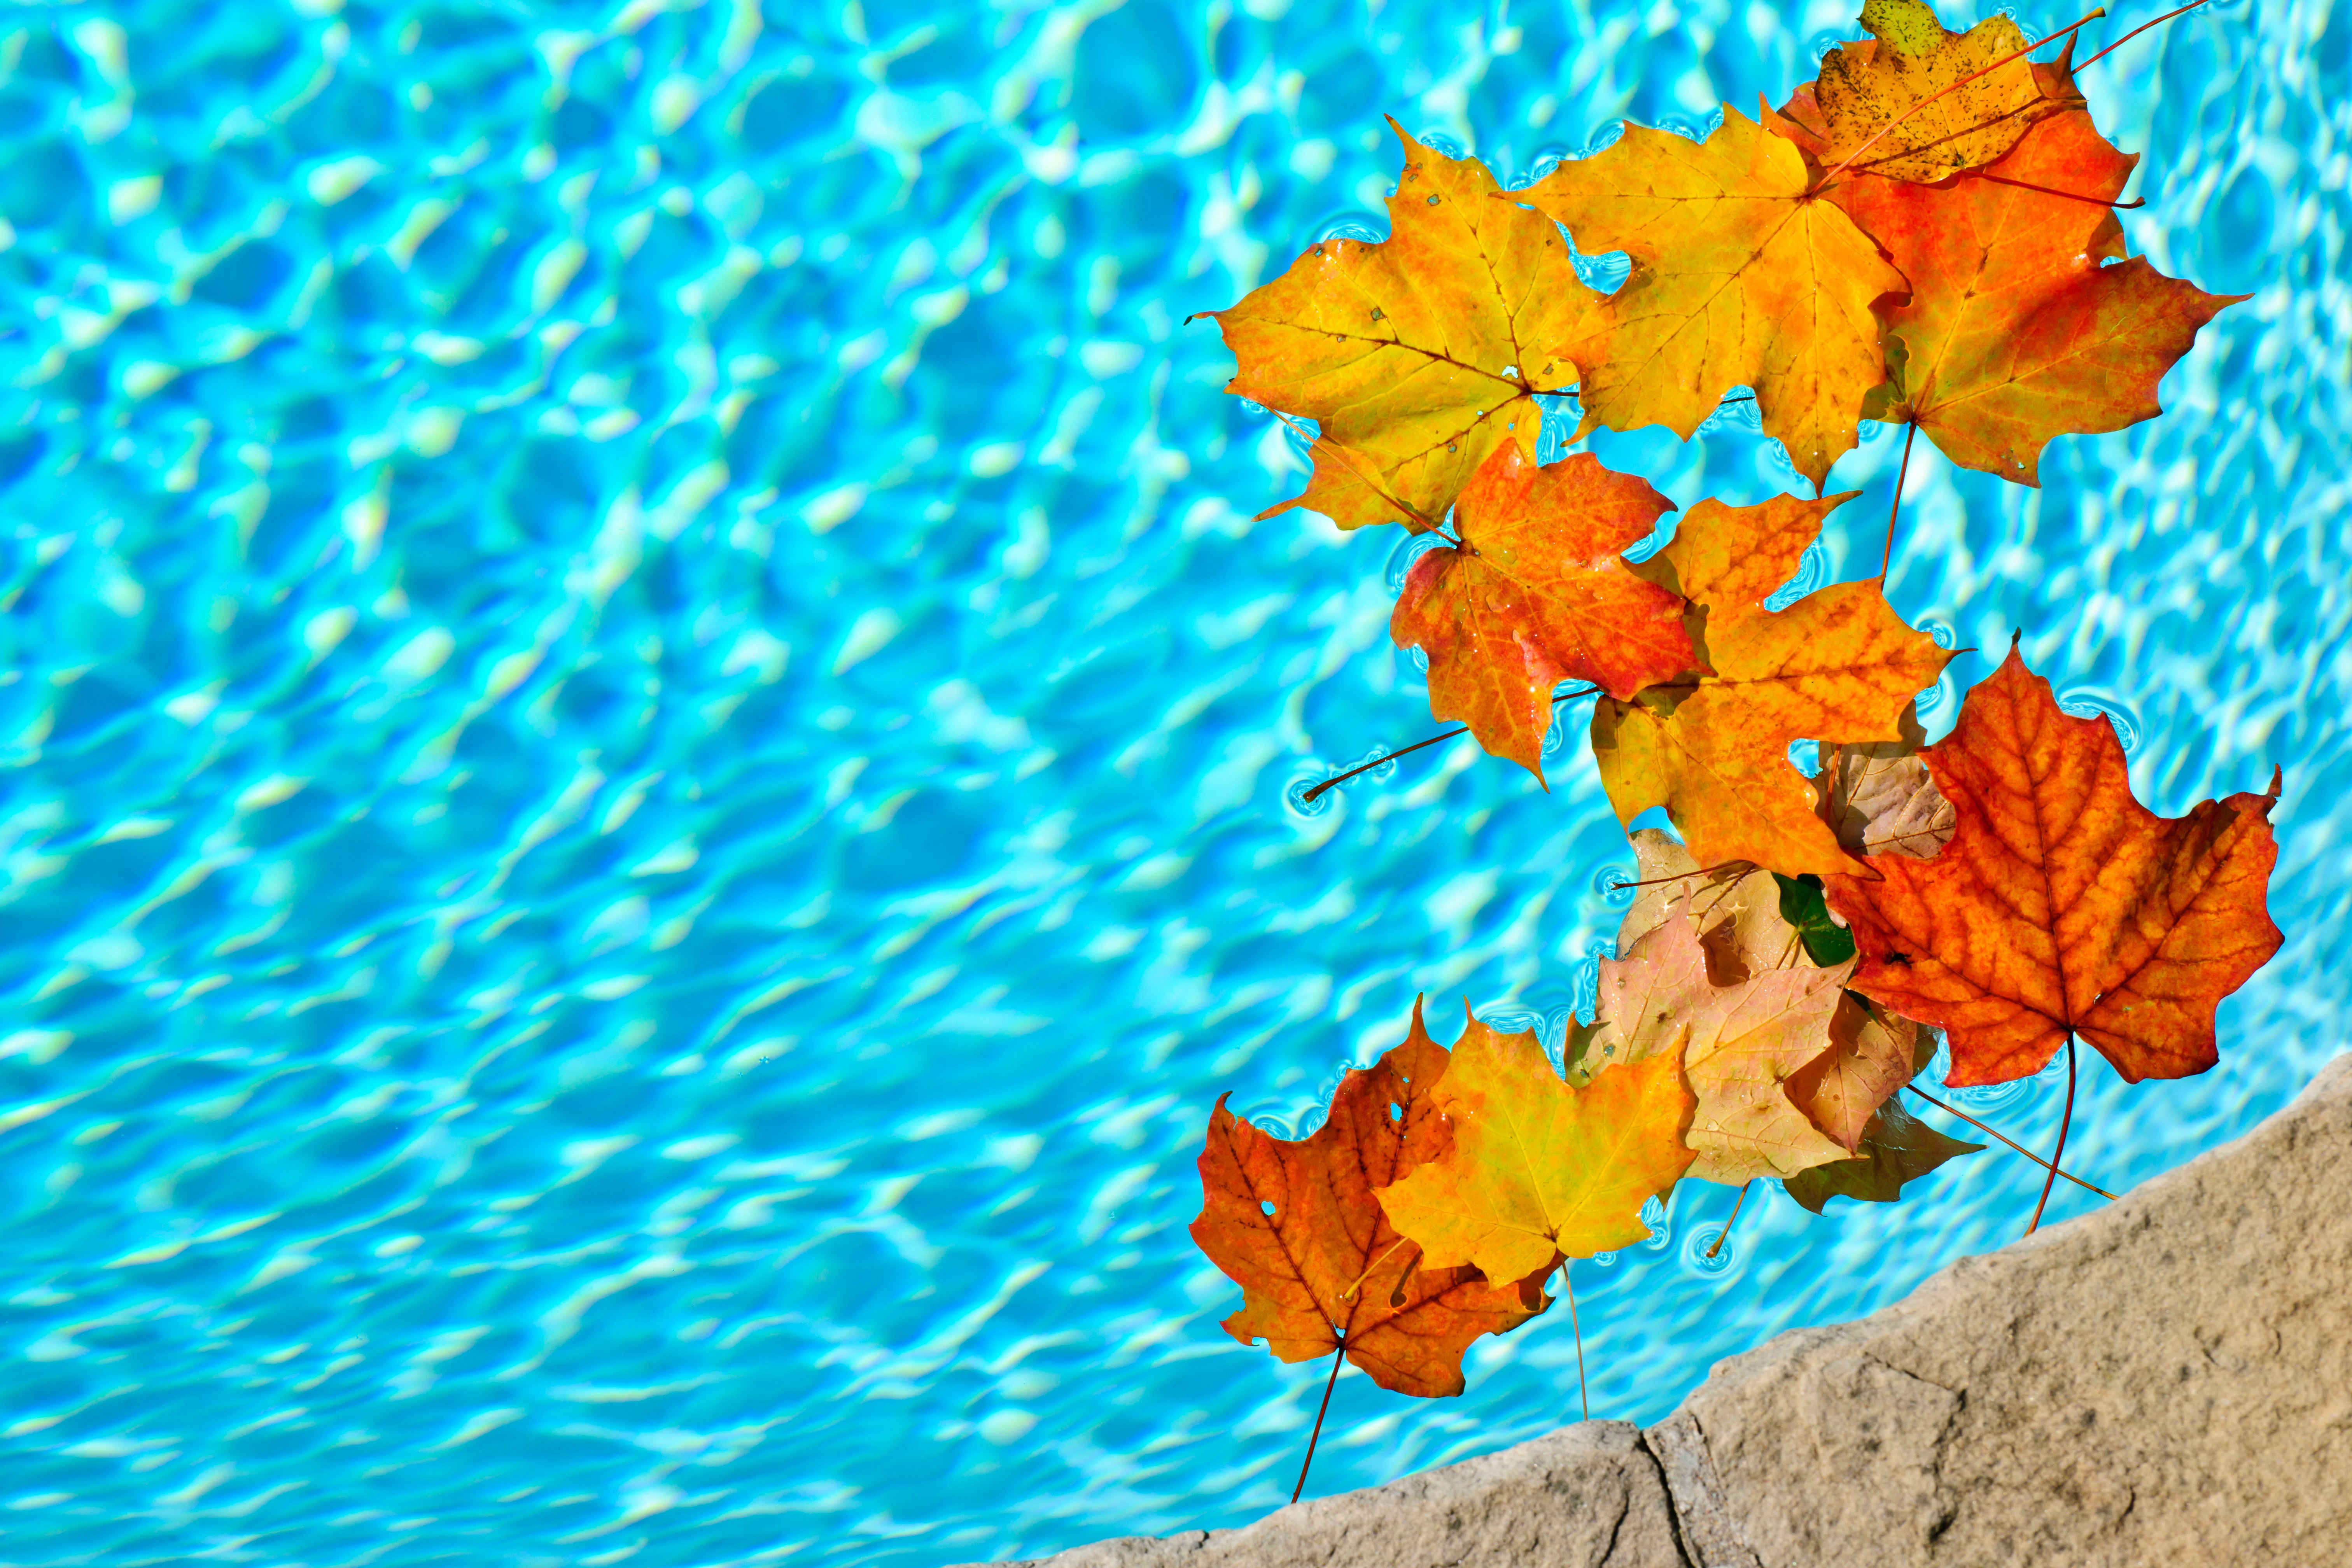 Pool with Leaves